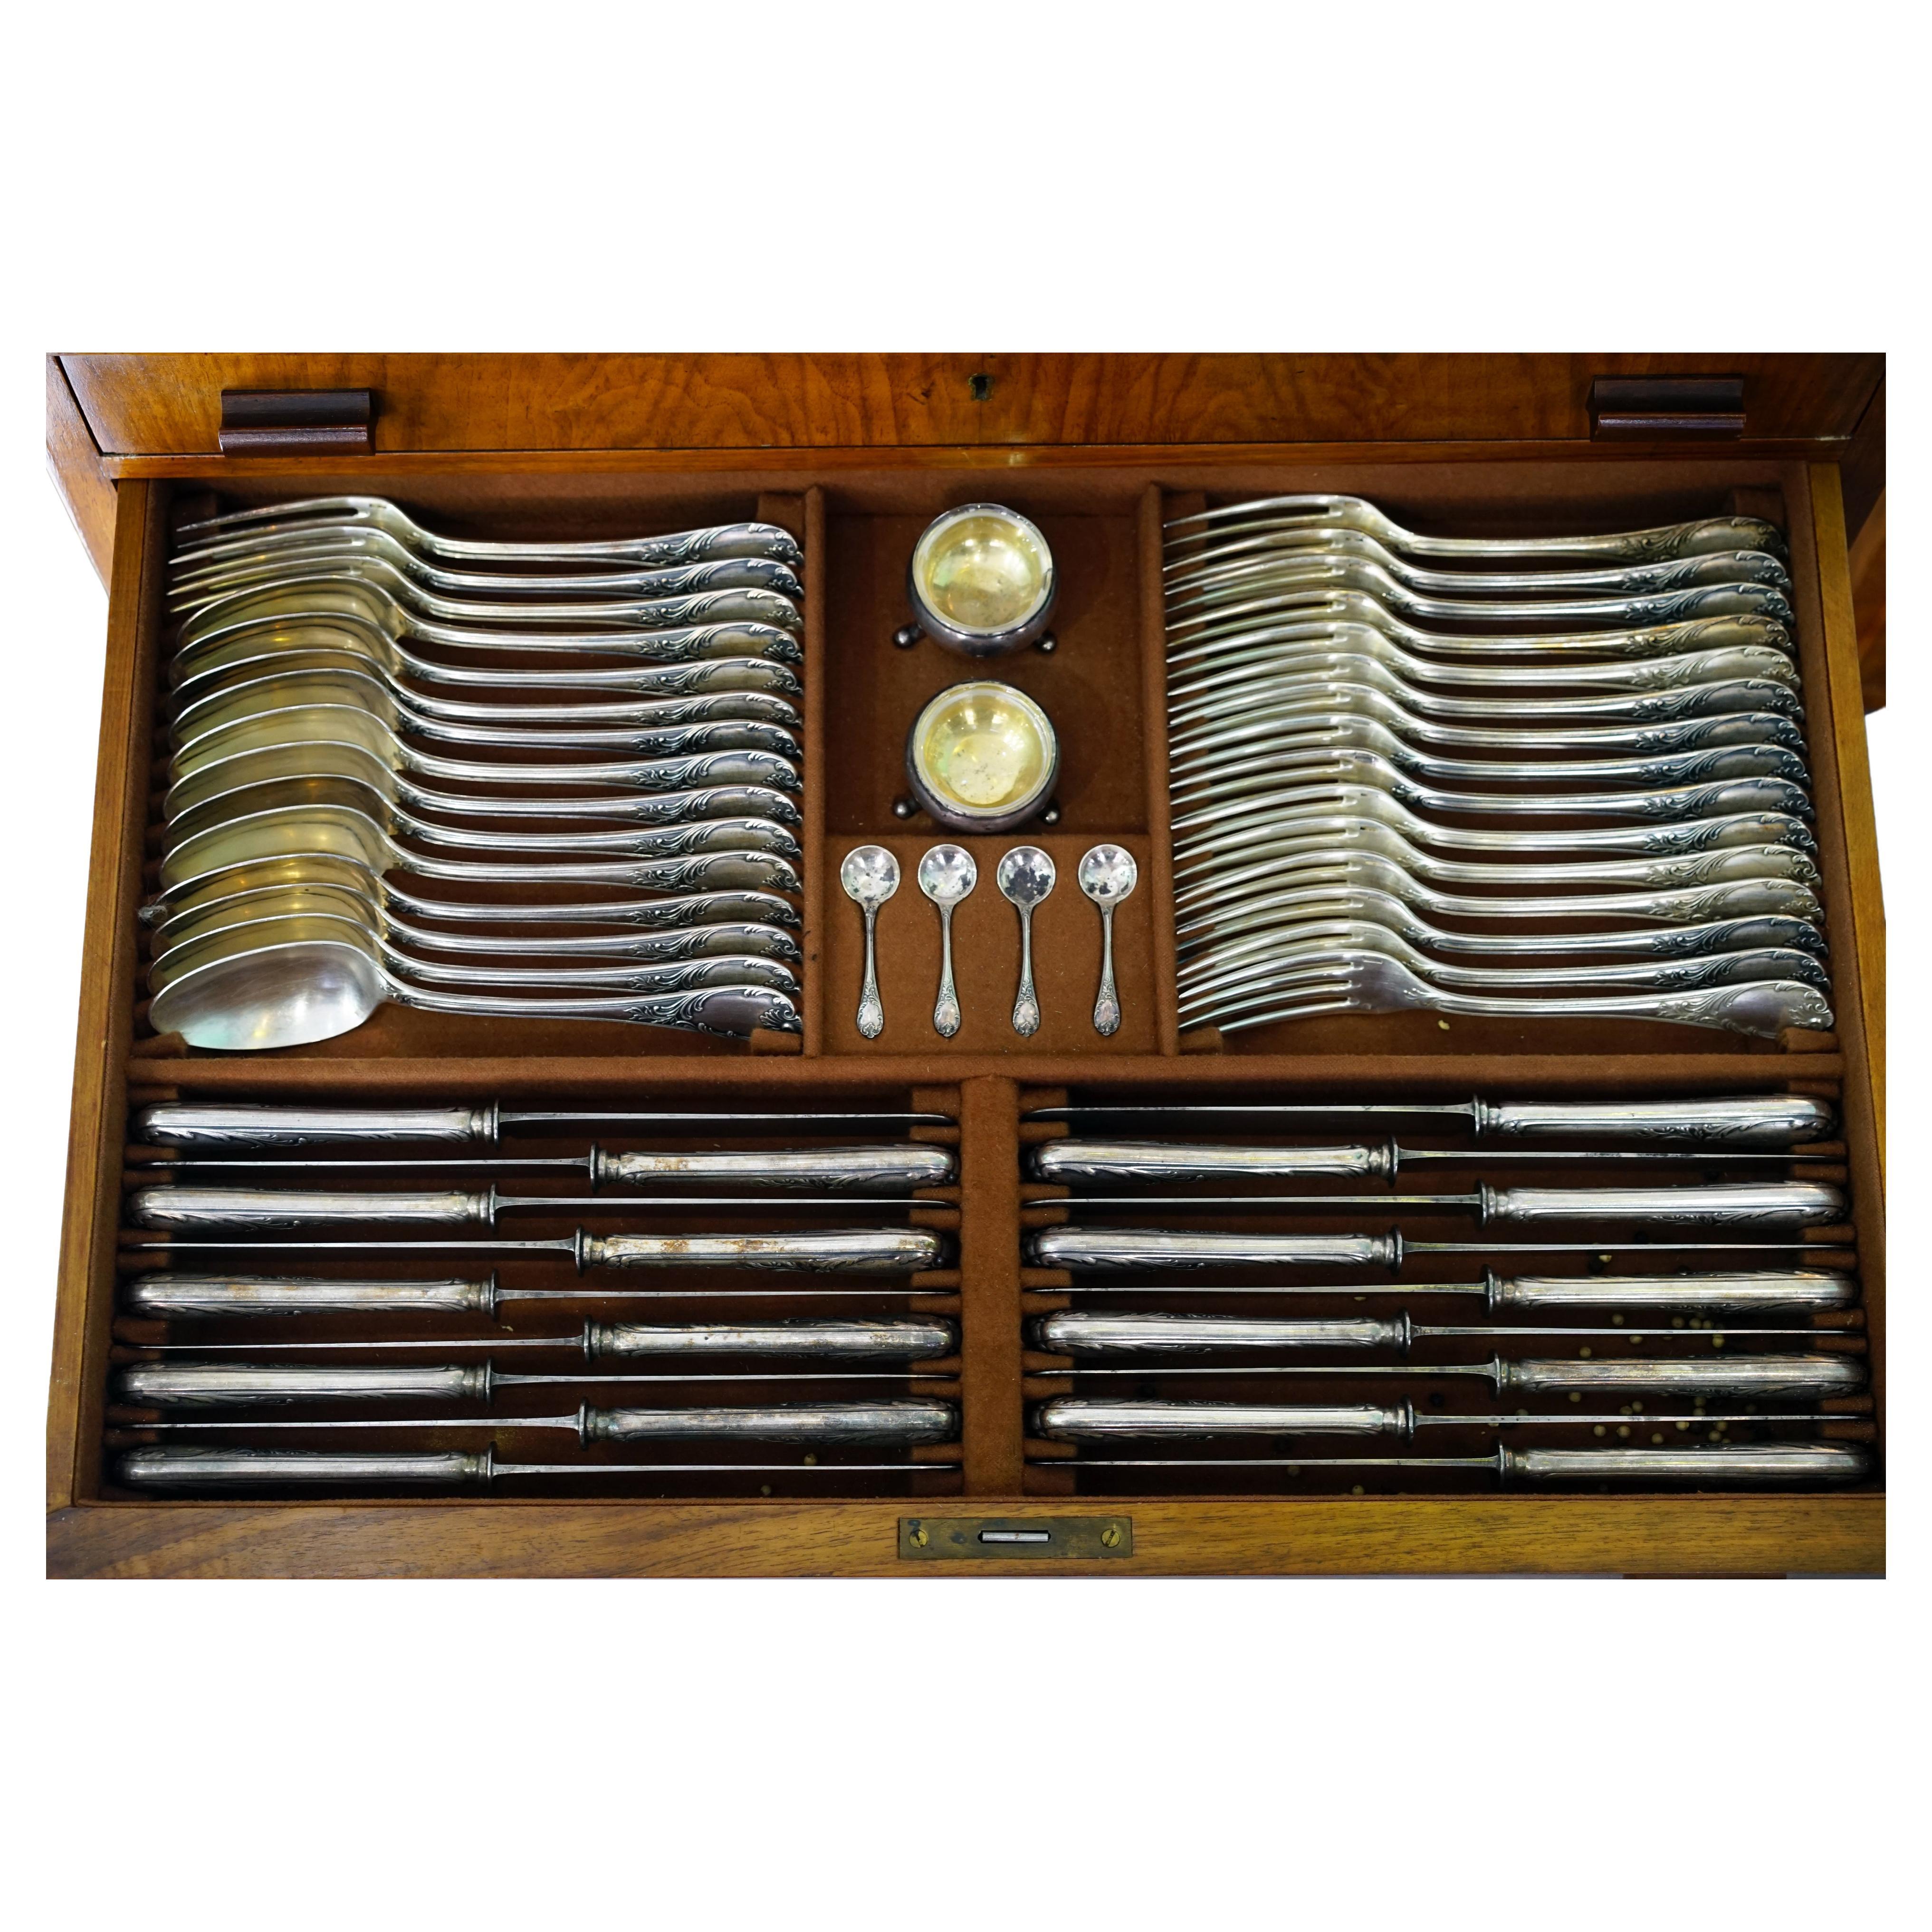 Christofle cutlery set For Sale